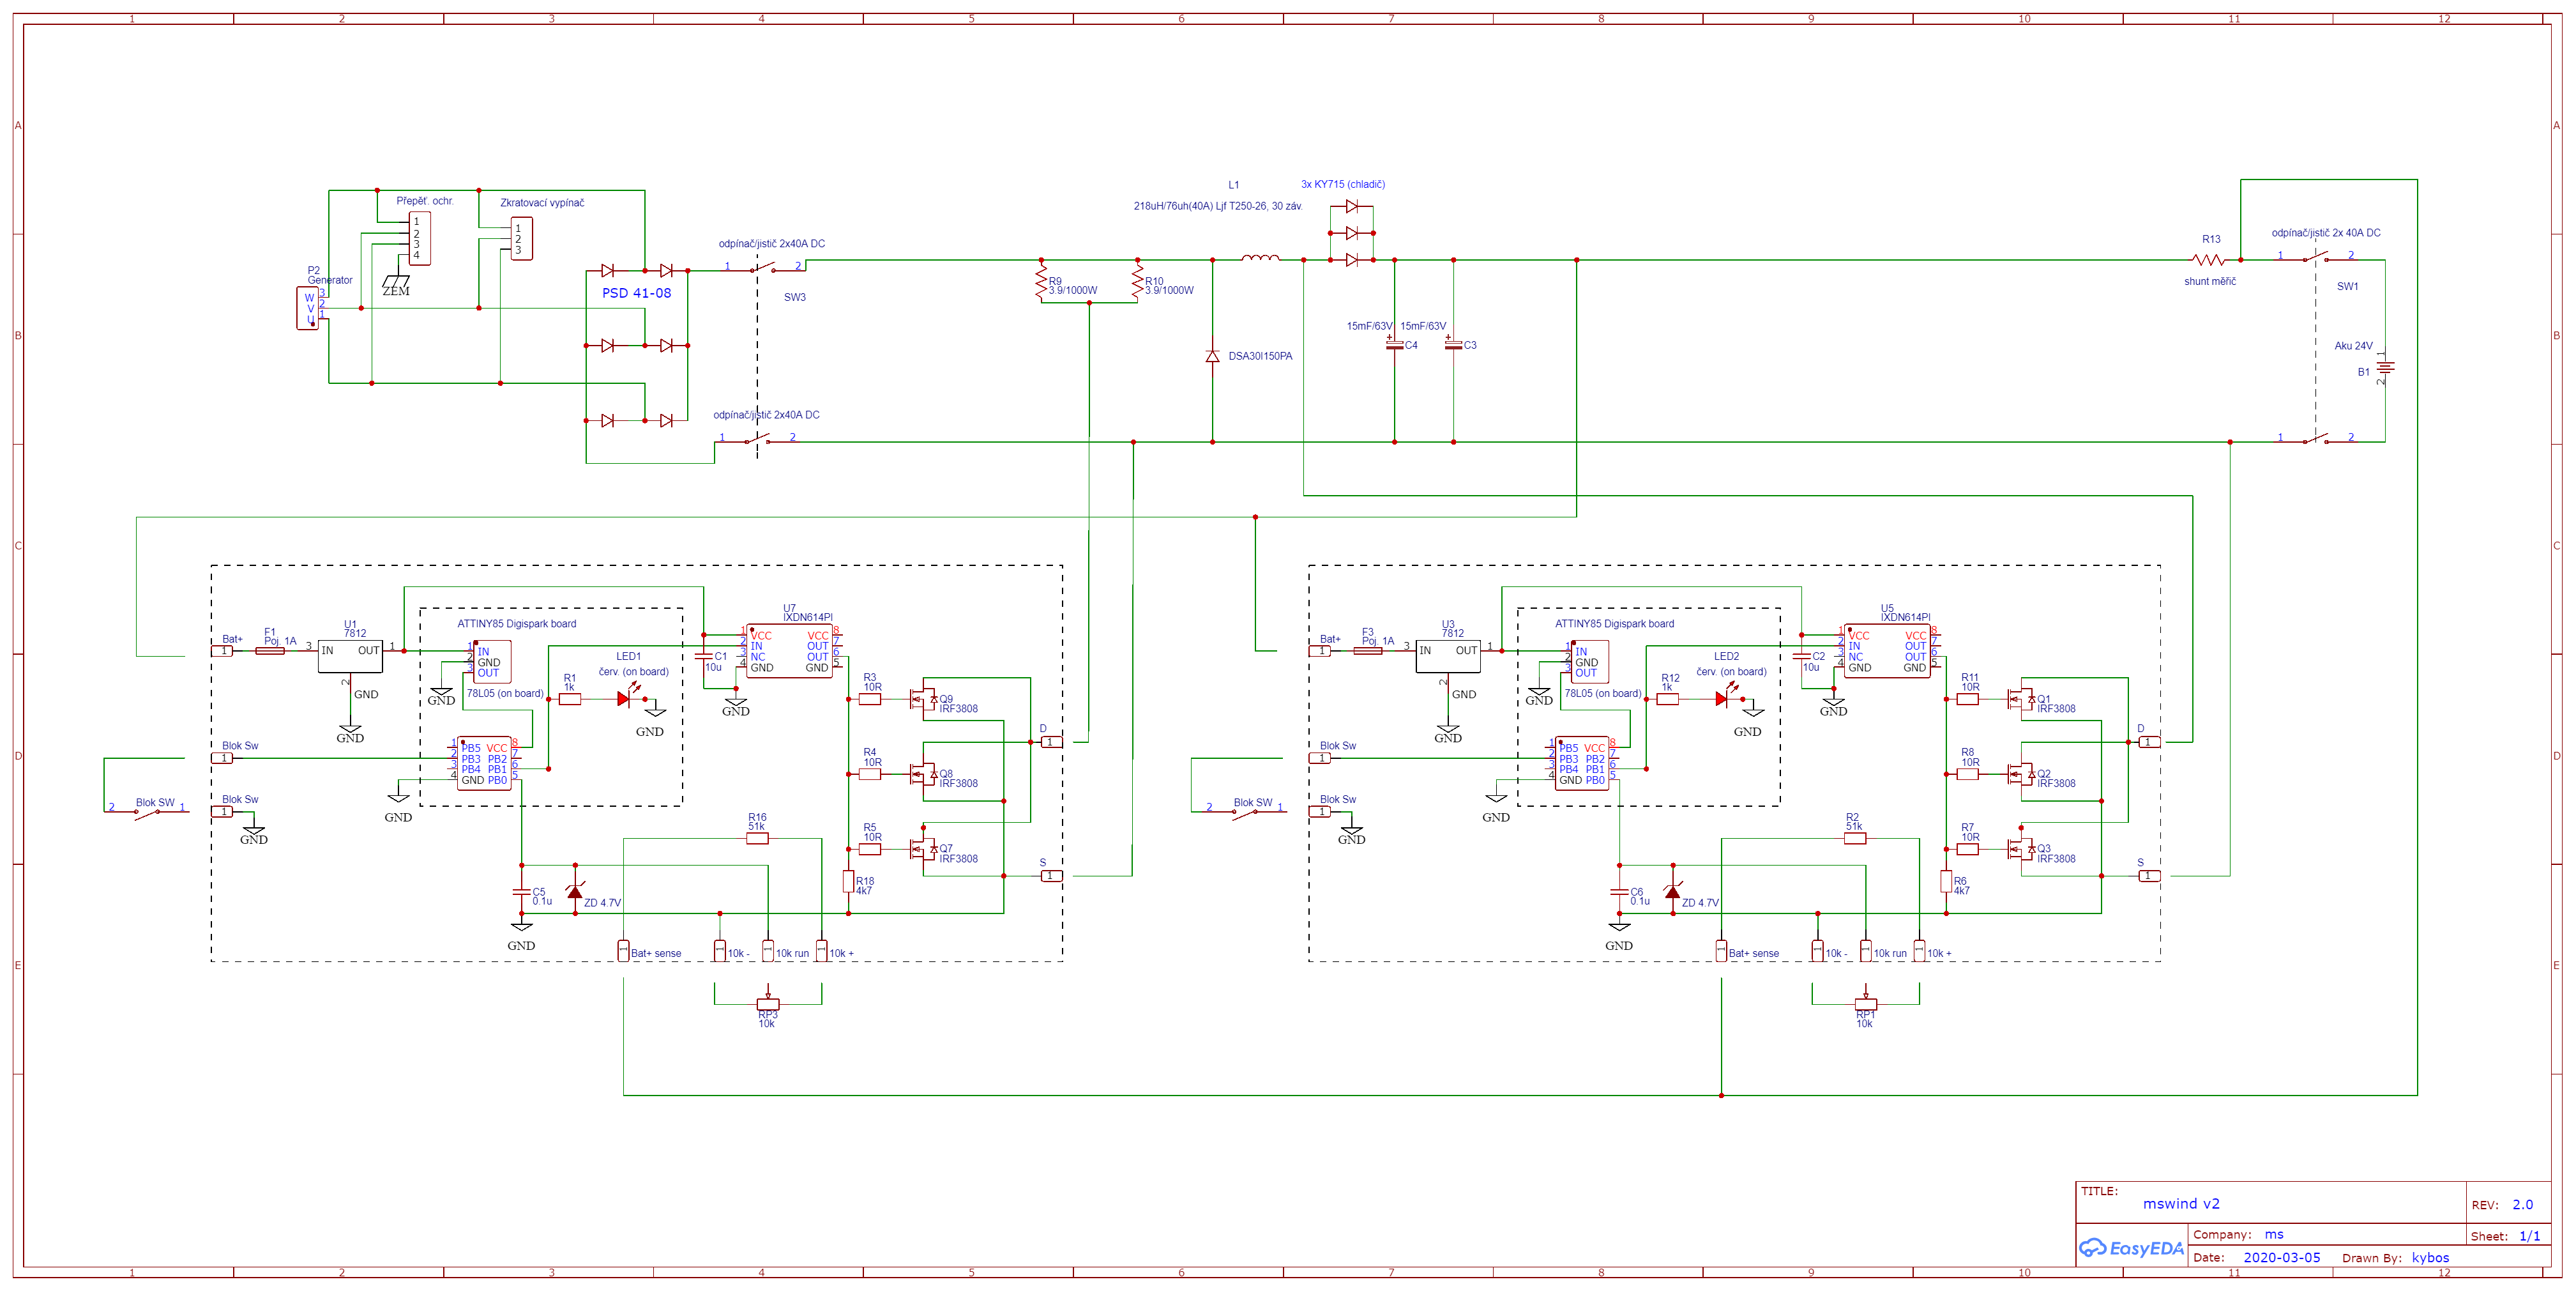 Schematic_mswind_v3_2021-10-31.png